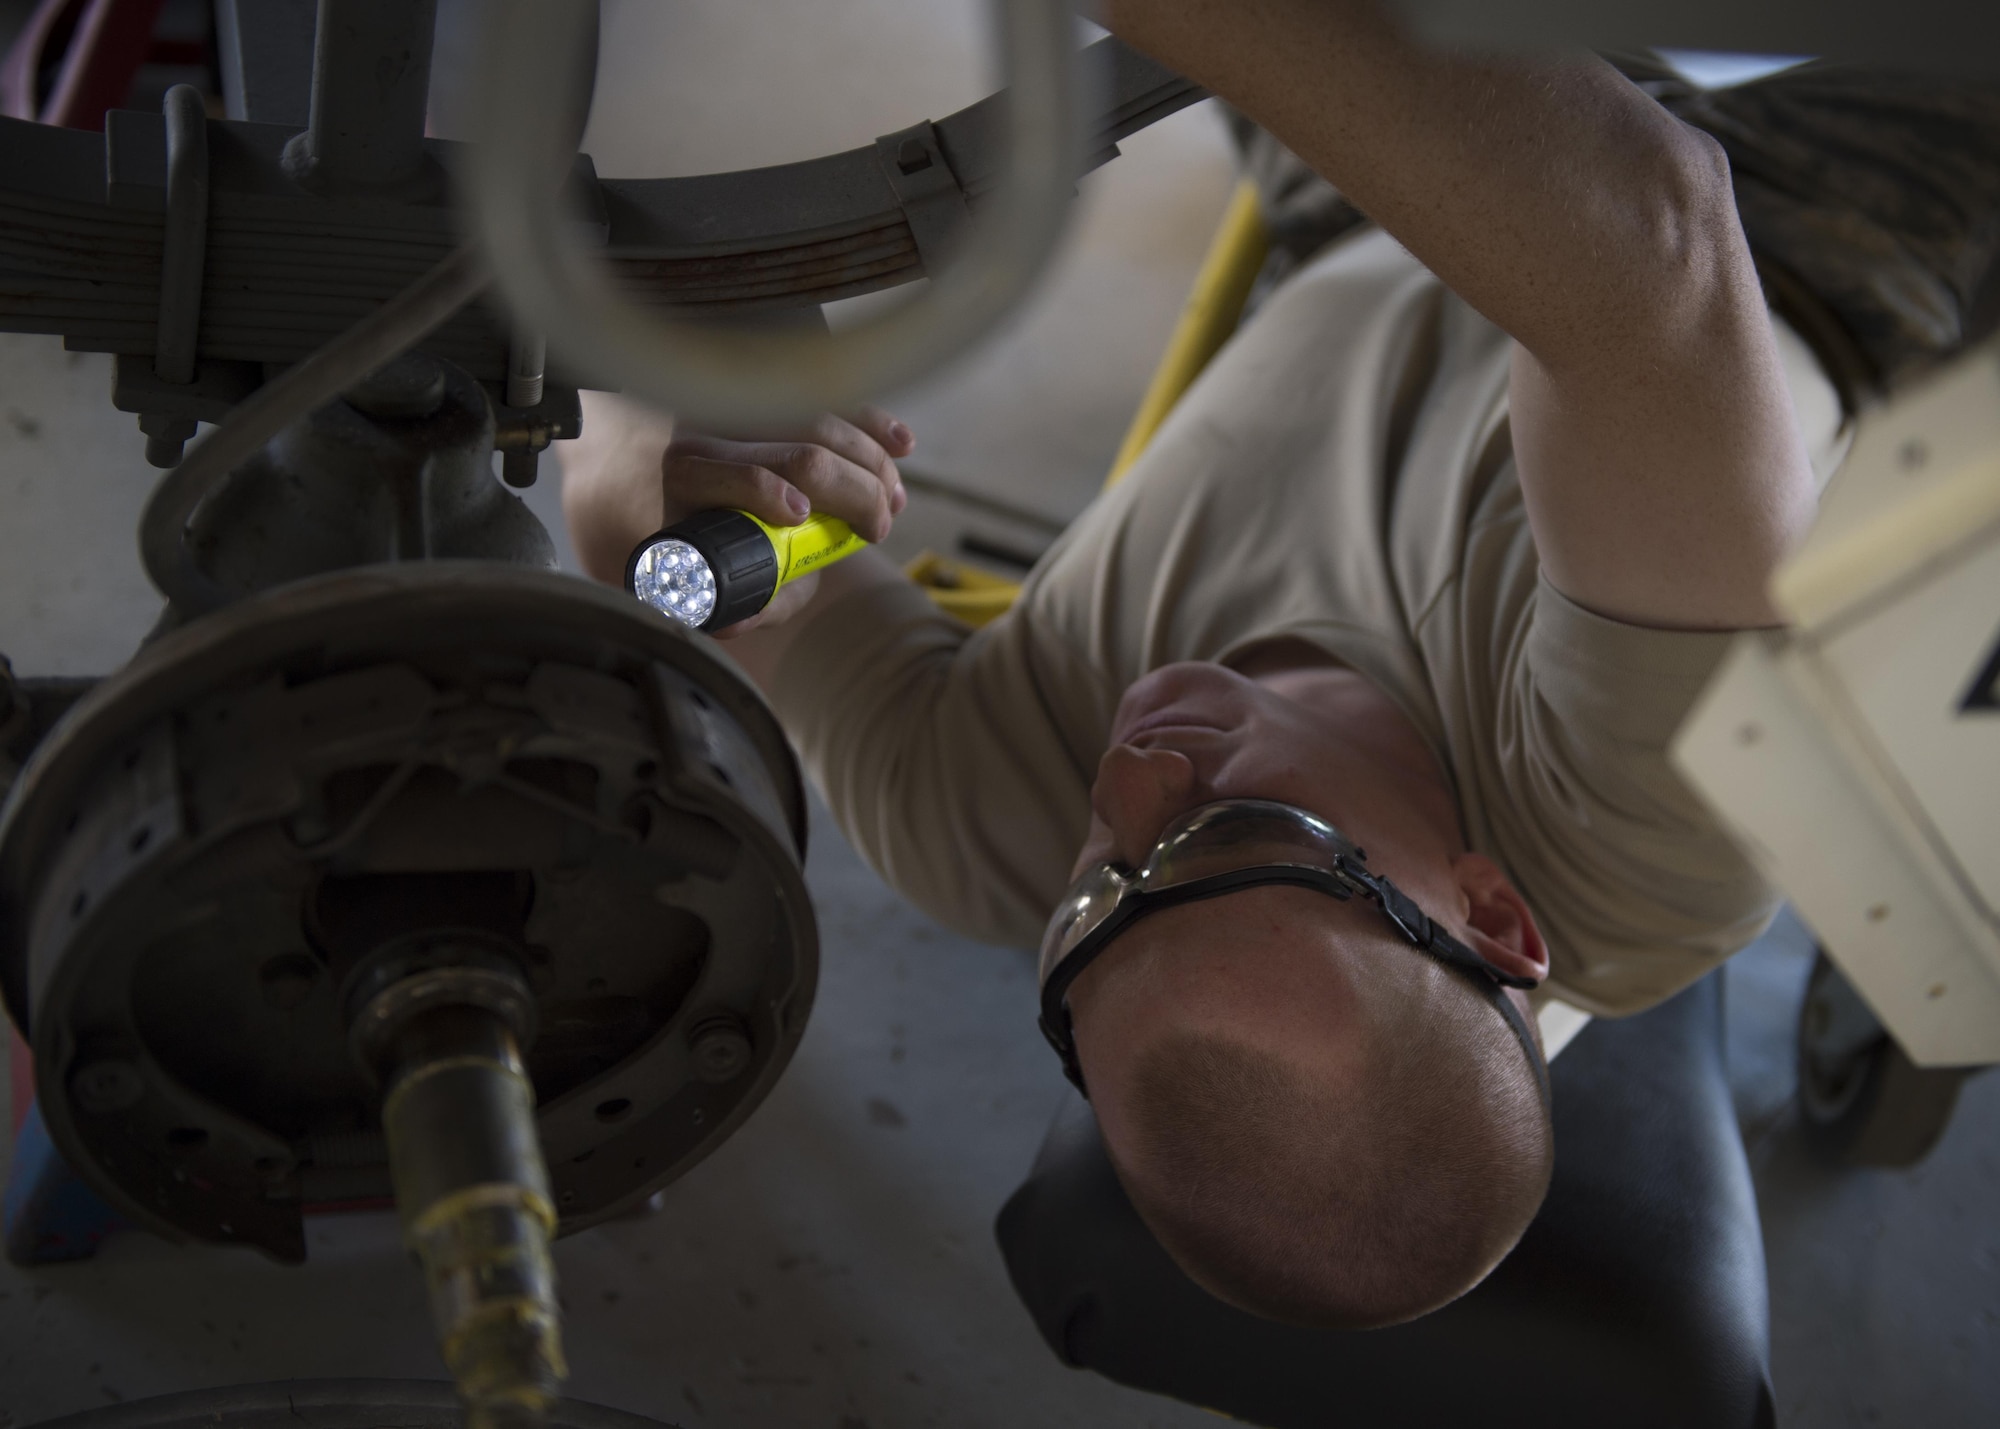 Senior Airman Joe, a 49th Maintenance Squadron munitions crew chief, inspects the bottom of an ammunitions trailer during a 720-day inspection at Holloman. During the inspection, crew chiefs disassembled and checked every aspect of the trailer for any cracks, breaks, missing parts and damages. (Last names are withheld due to operational requirements. U.S. Air Force photo by Senior Airman BreeAnn Sachs)